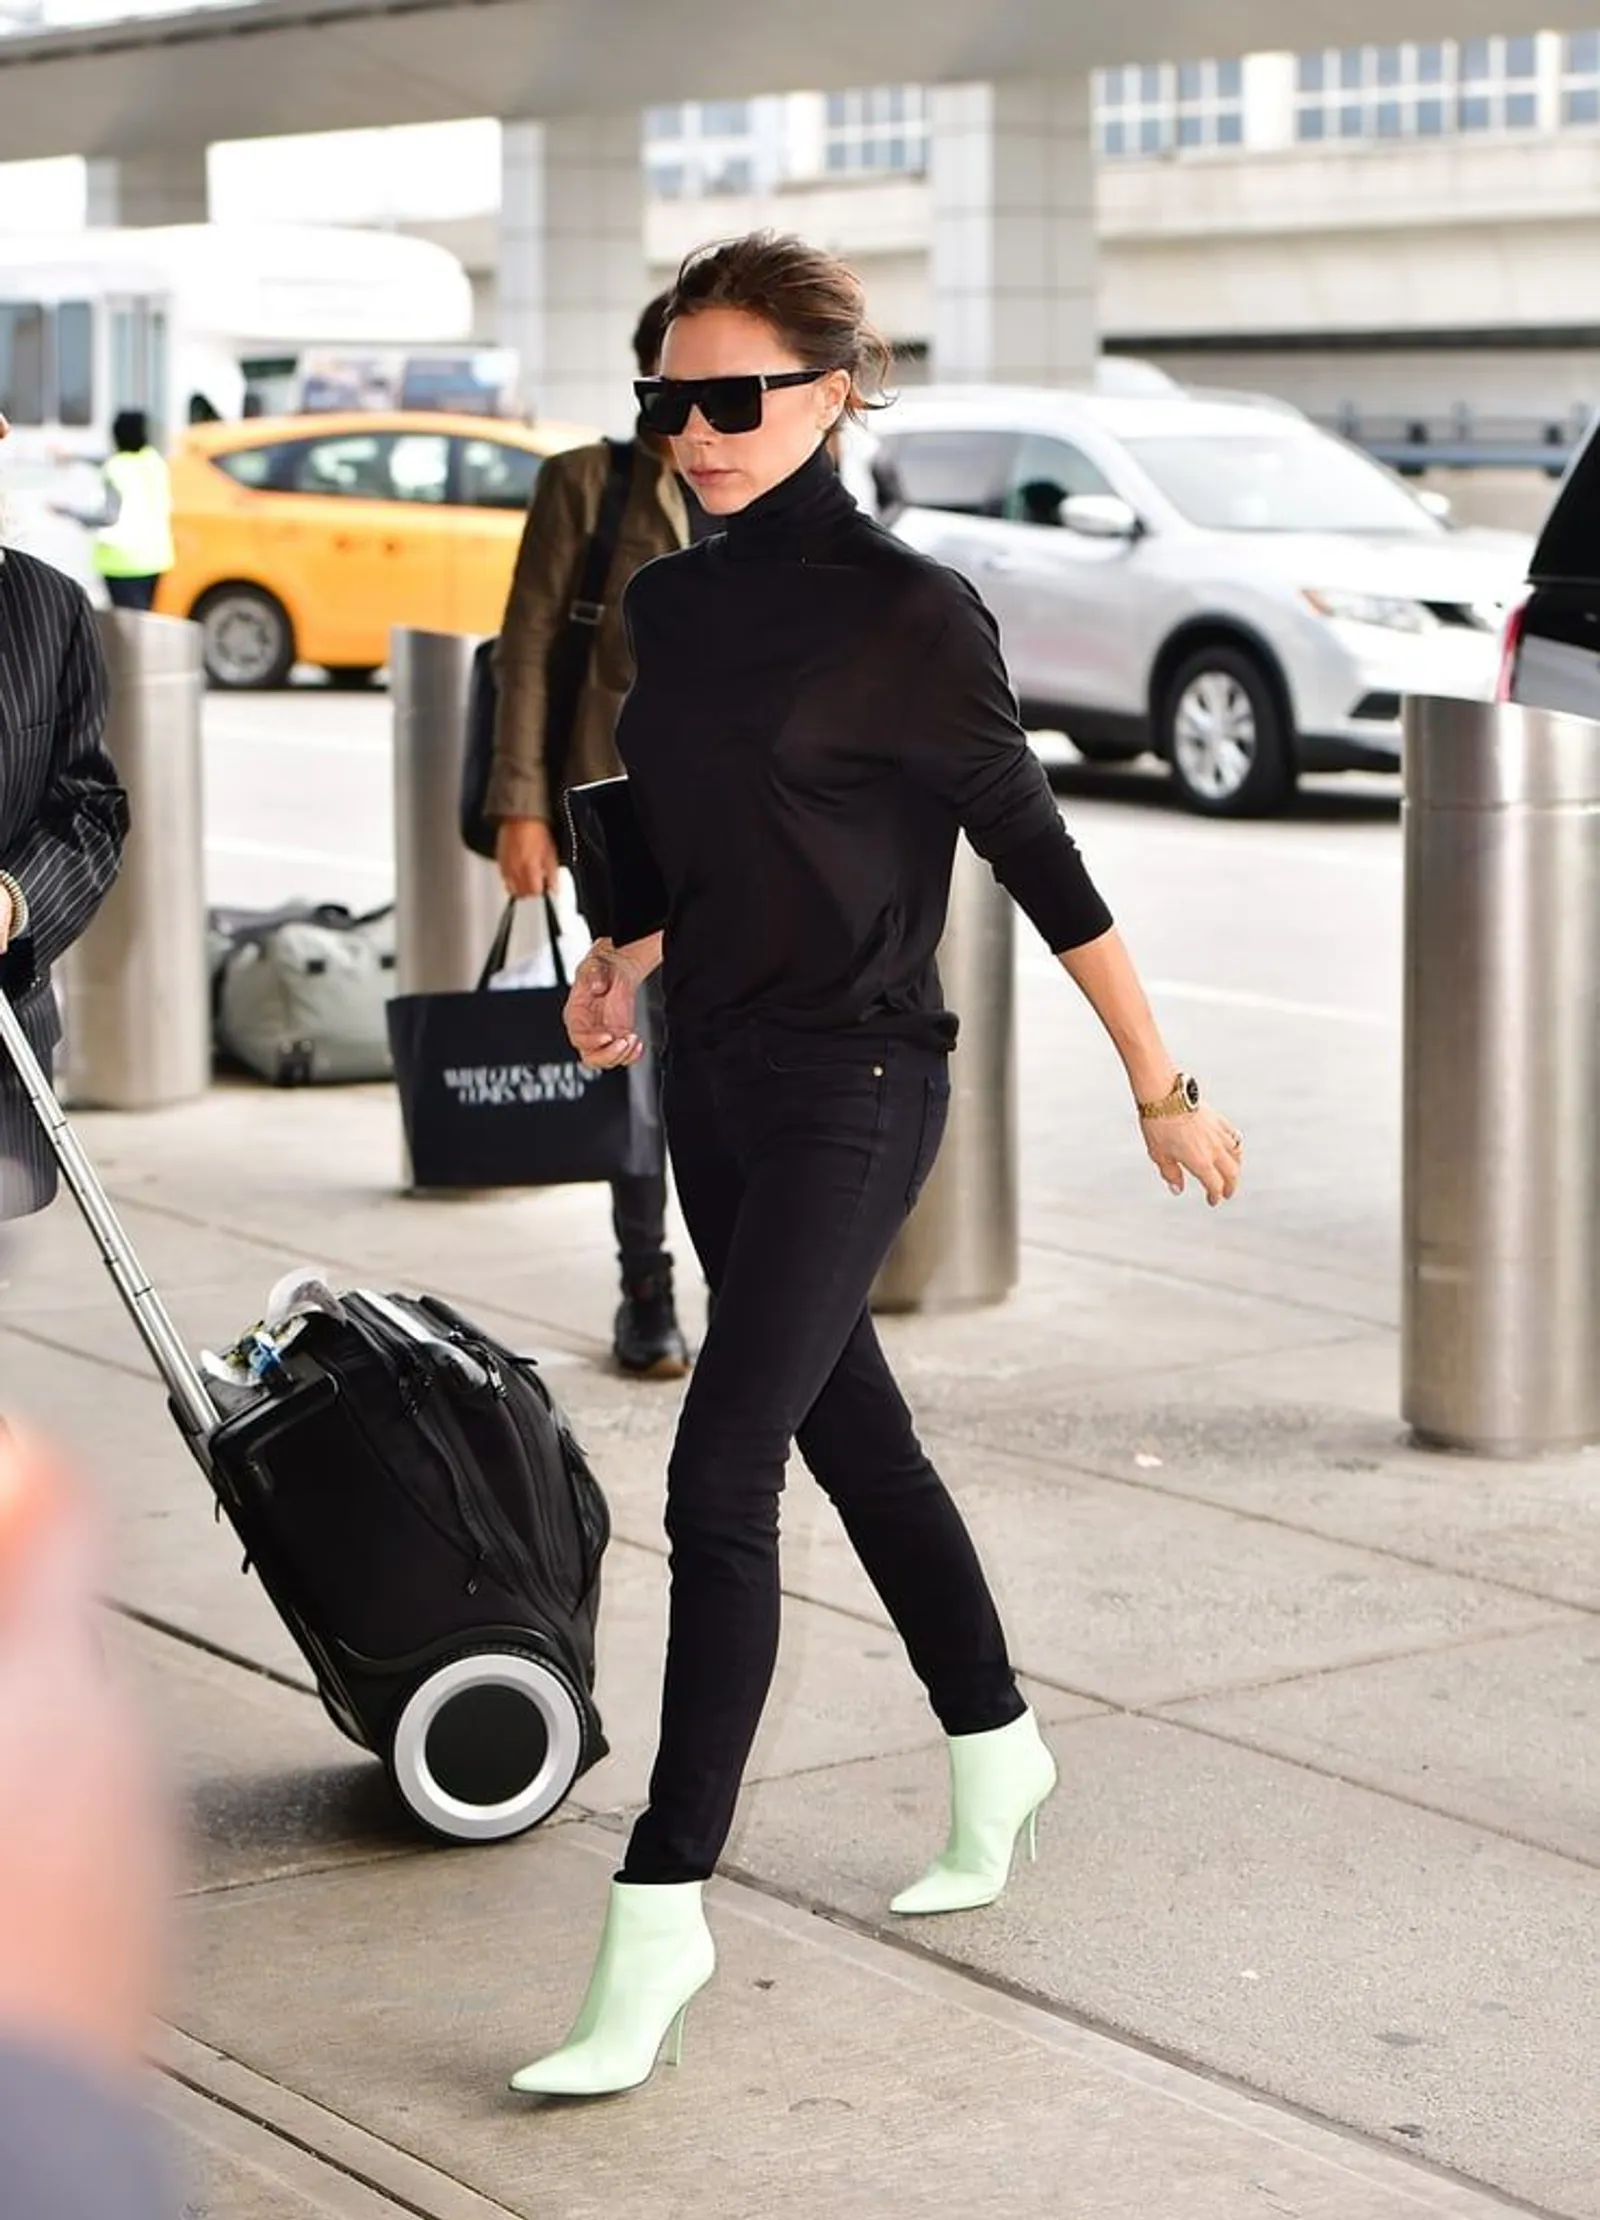 On Point! Intip 5 Airport Style Kece A la Seleb Hollywood